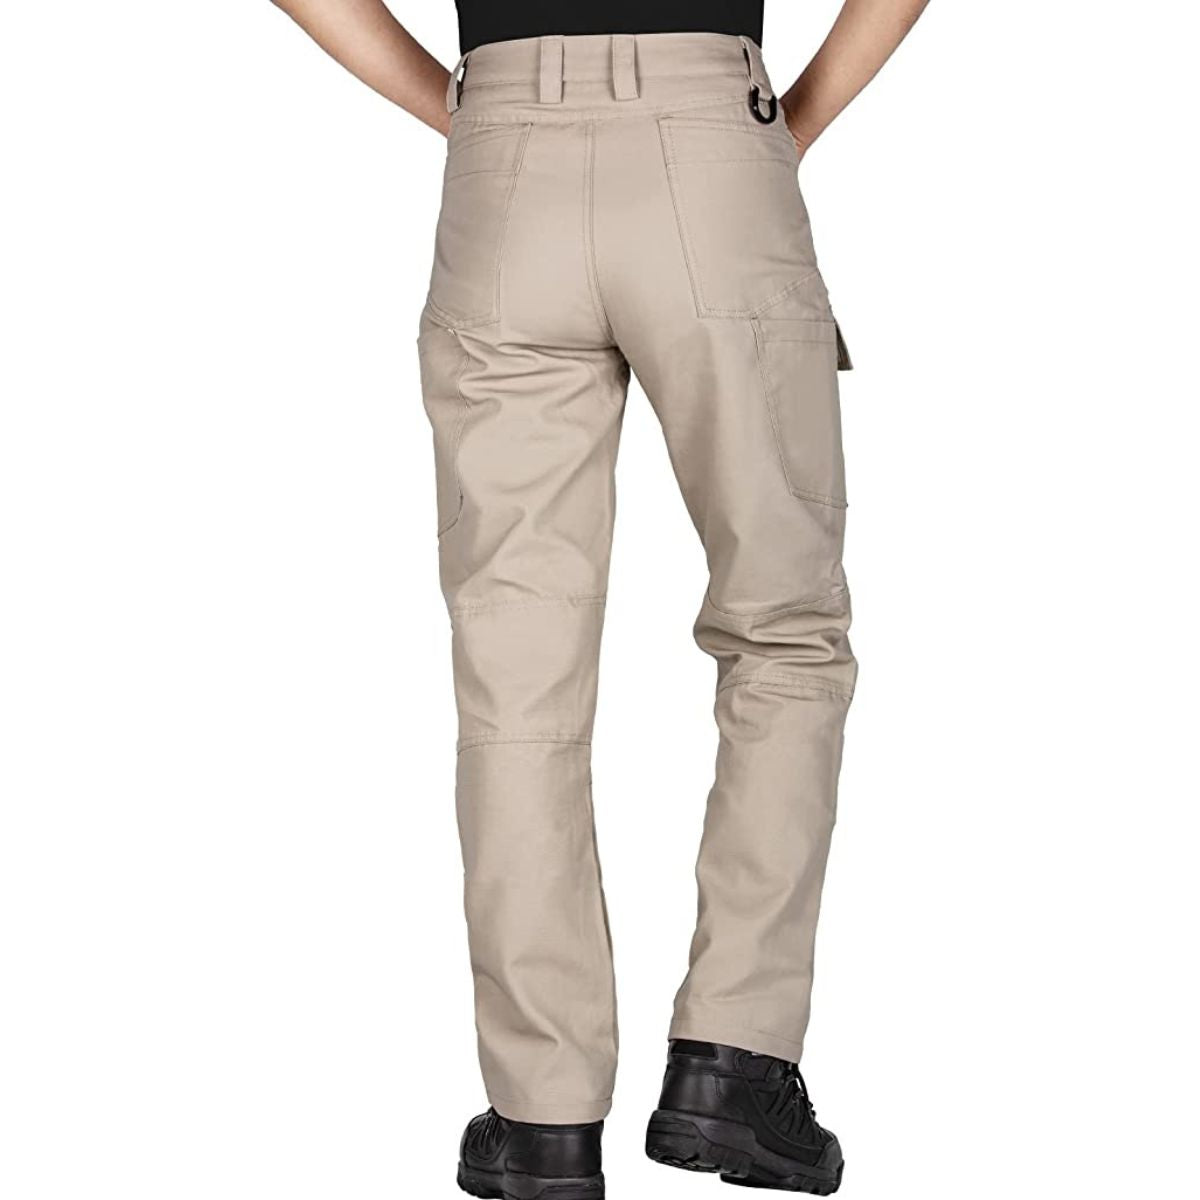 WICKEDSTOCK Ripstop Mens Cargo Pants - Durable Tactical Pants Stretch  Waistband Multiple Pockets-Military Pants